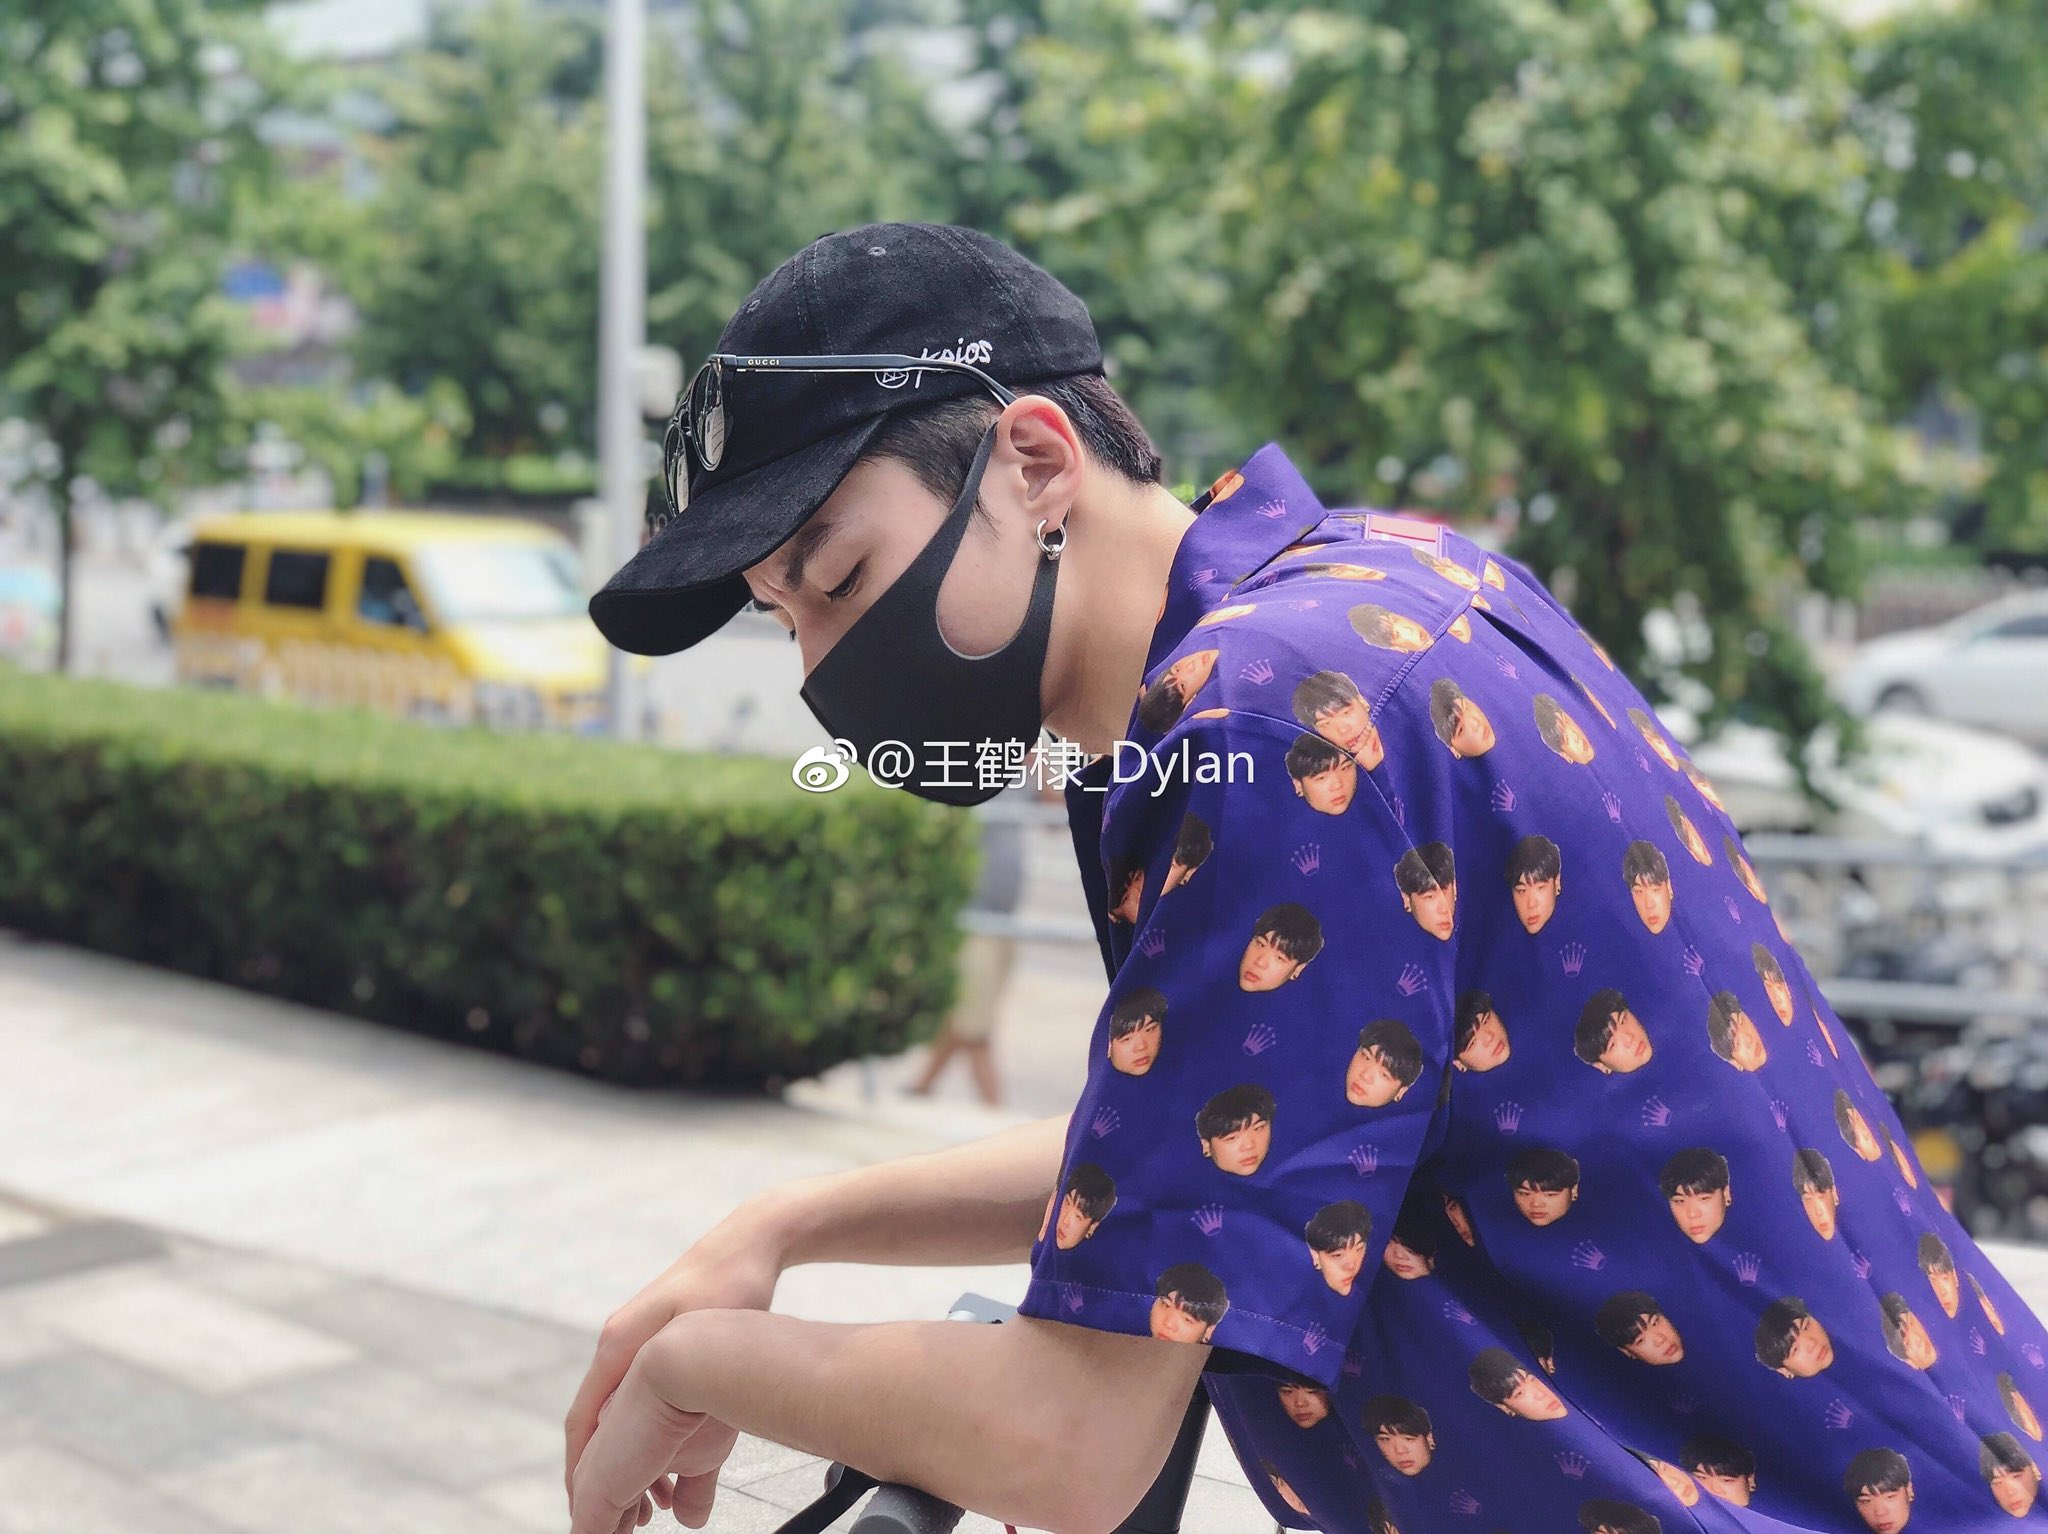 Dylan Wang Daily 😎 on X: [HD] 180713 Super3 Basketball Competition cr:  maskedknight #DylanWang #王鹤棣  / X